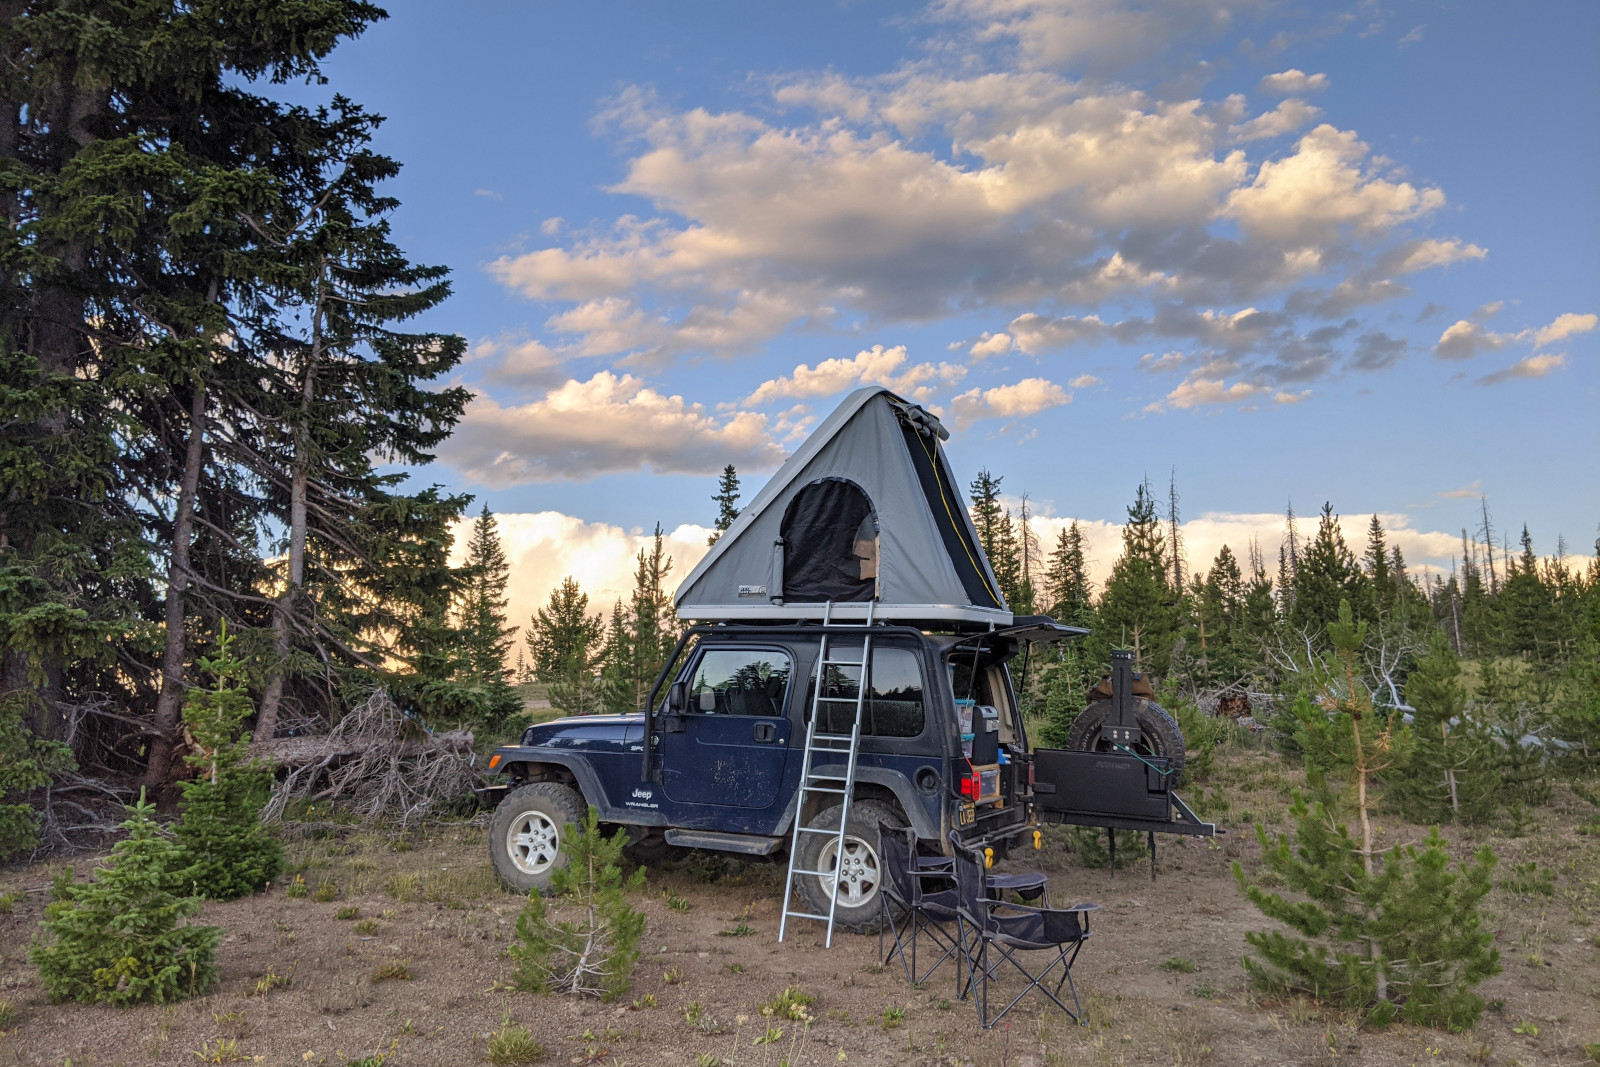 Setting up the Autohome Columbus rooftop tent at a dispersed campsite